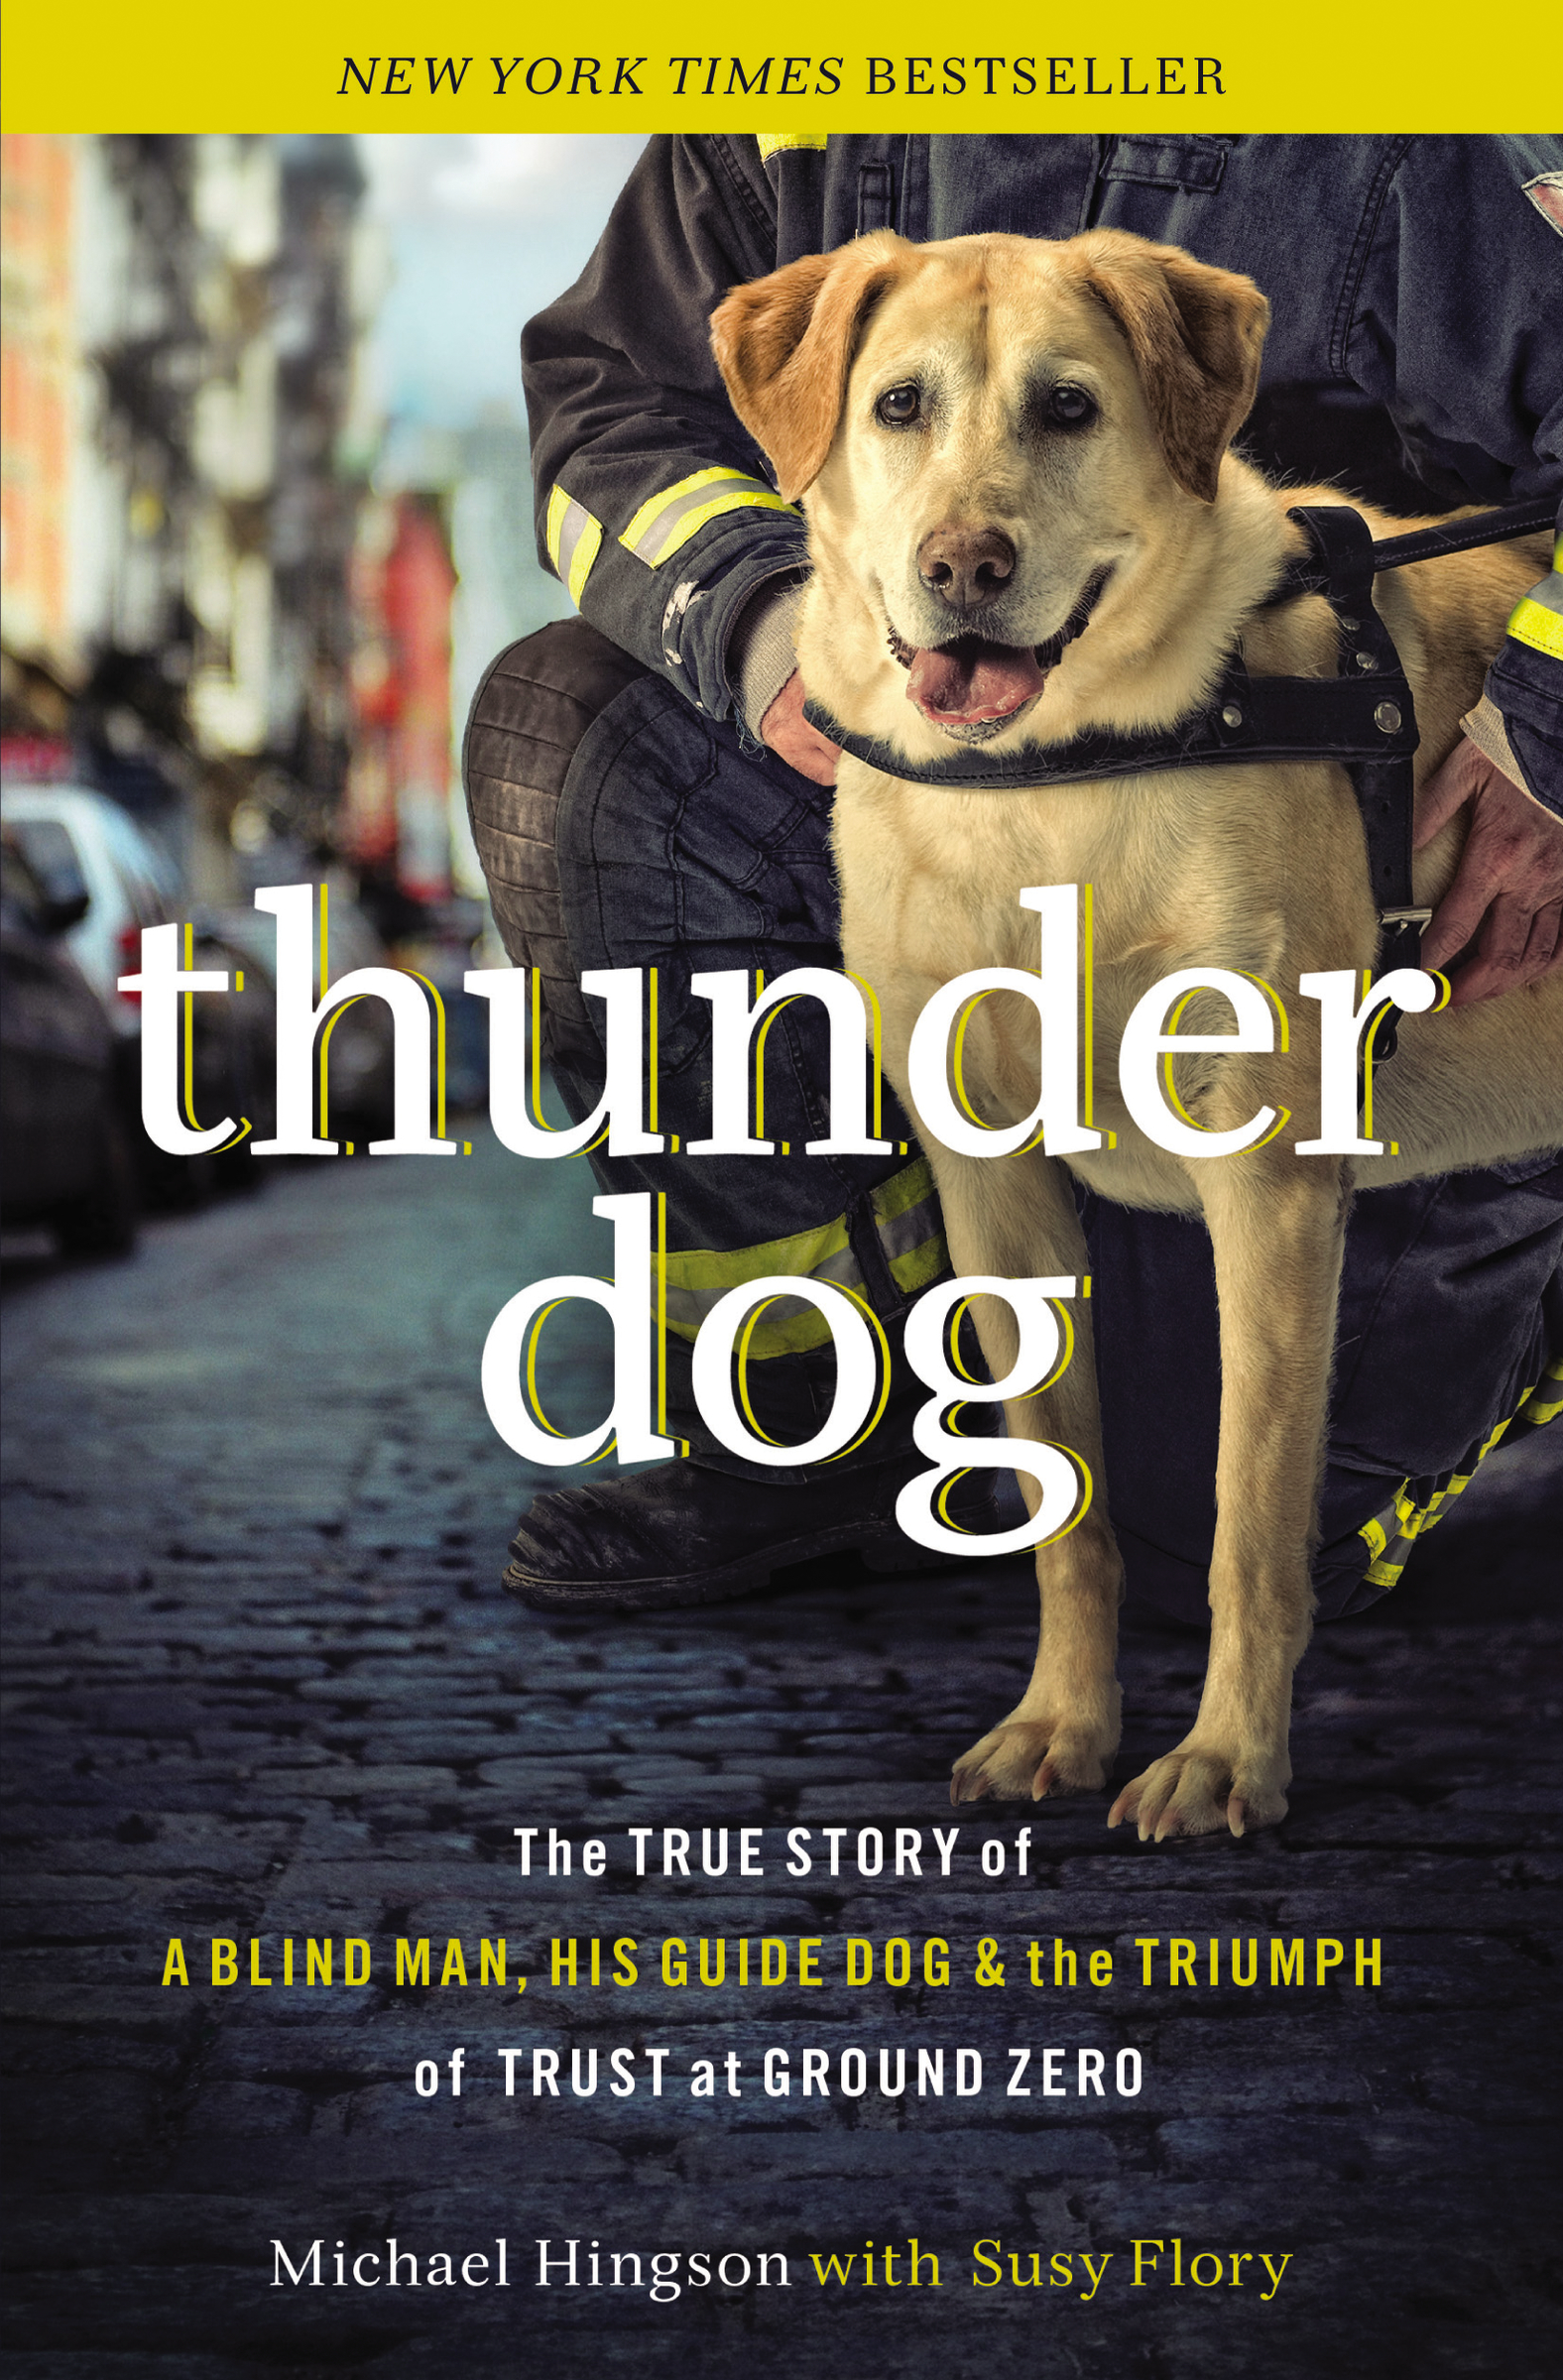 Thunder dog the true story of a blind man, his guide dog, and the triumph of trust at Ground Zero cover image